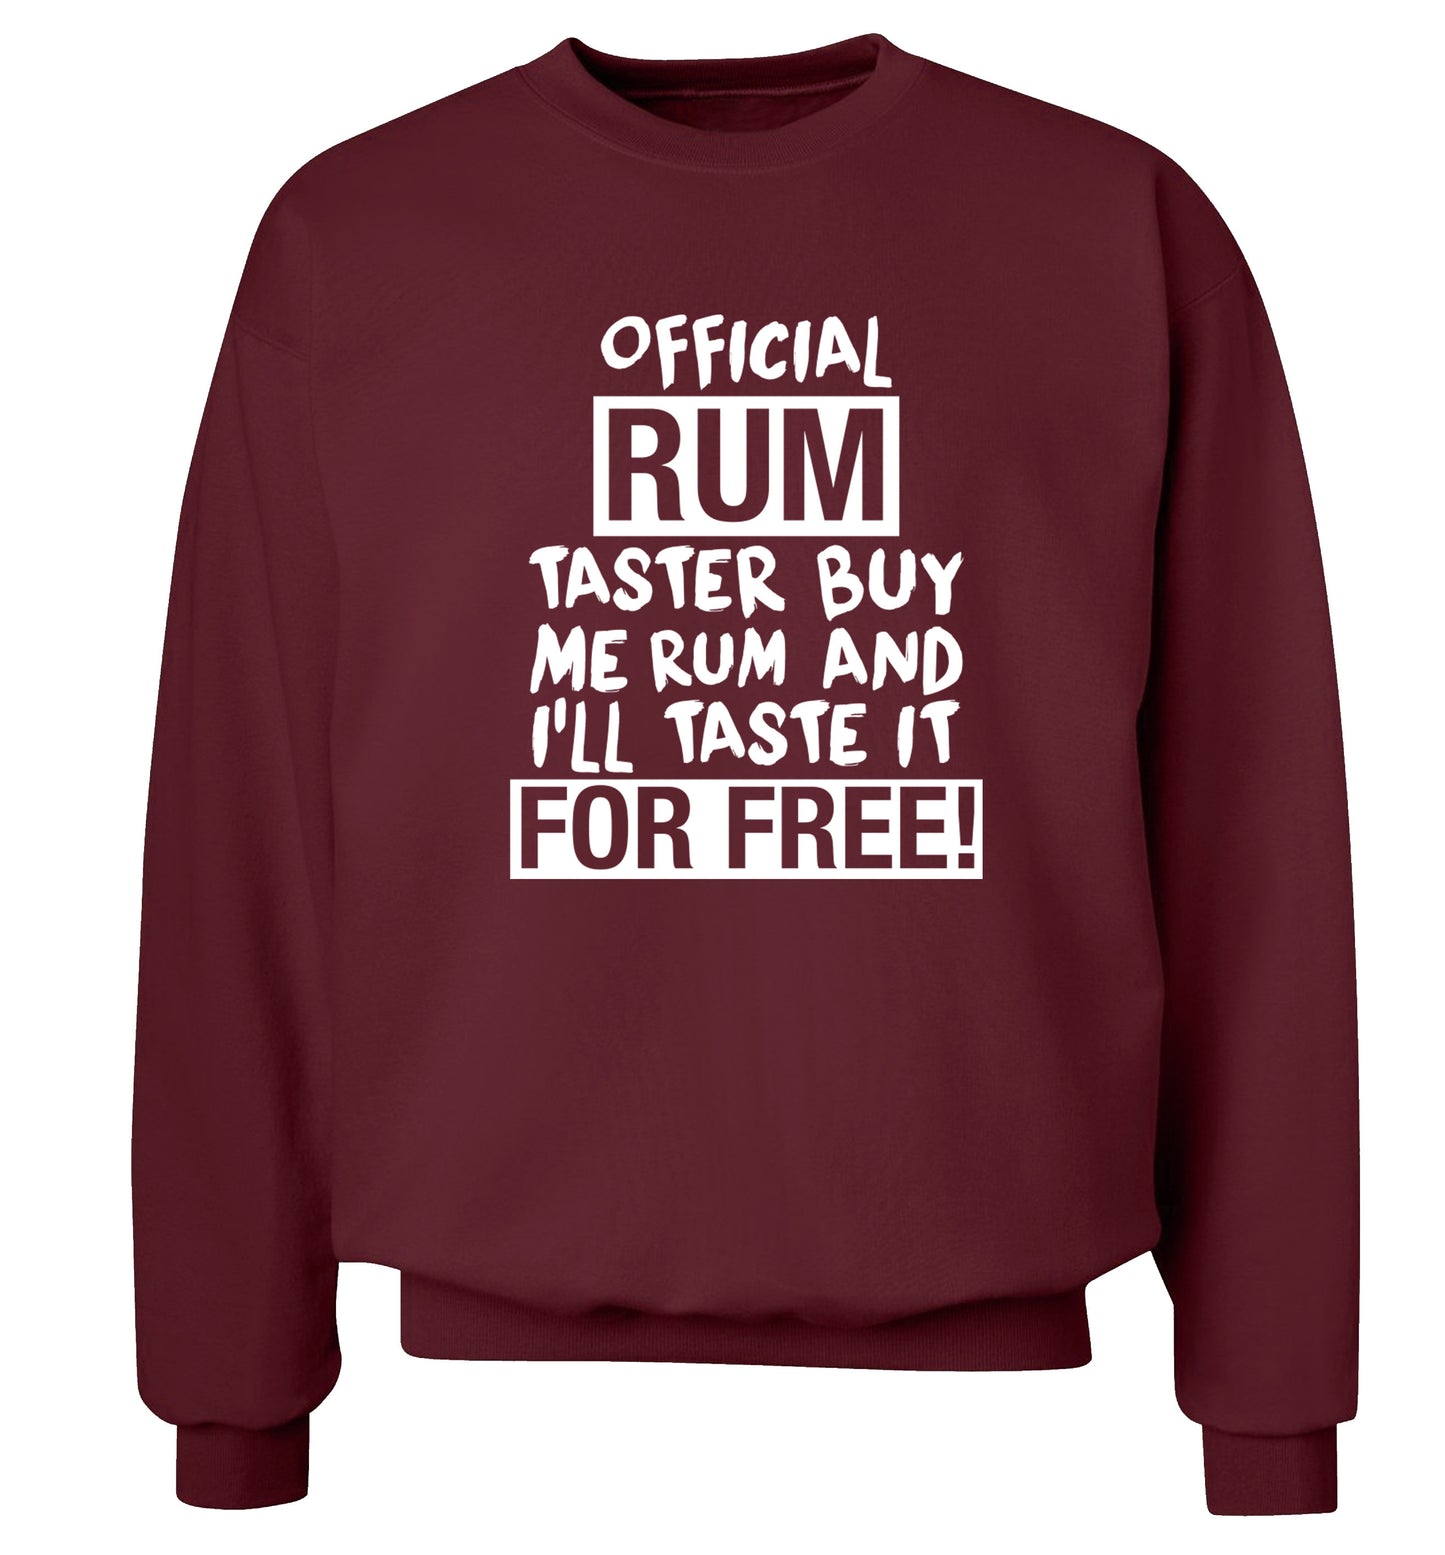 Official rum taster buy me rum and I'll taste it for free Adult's unisex maroon Sweater 2XL